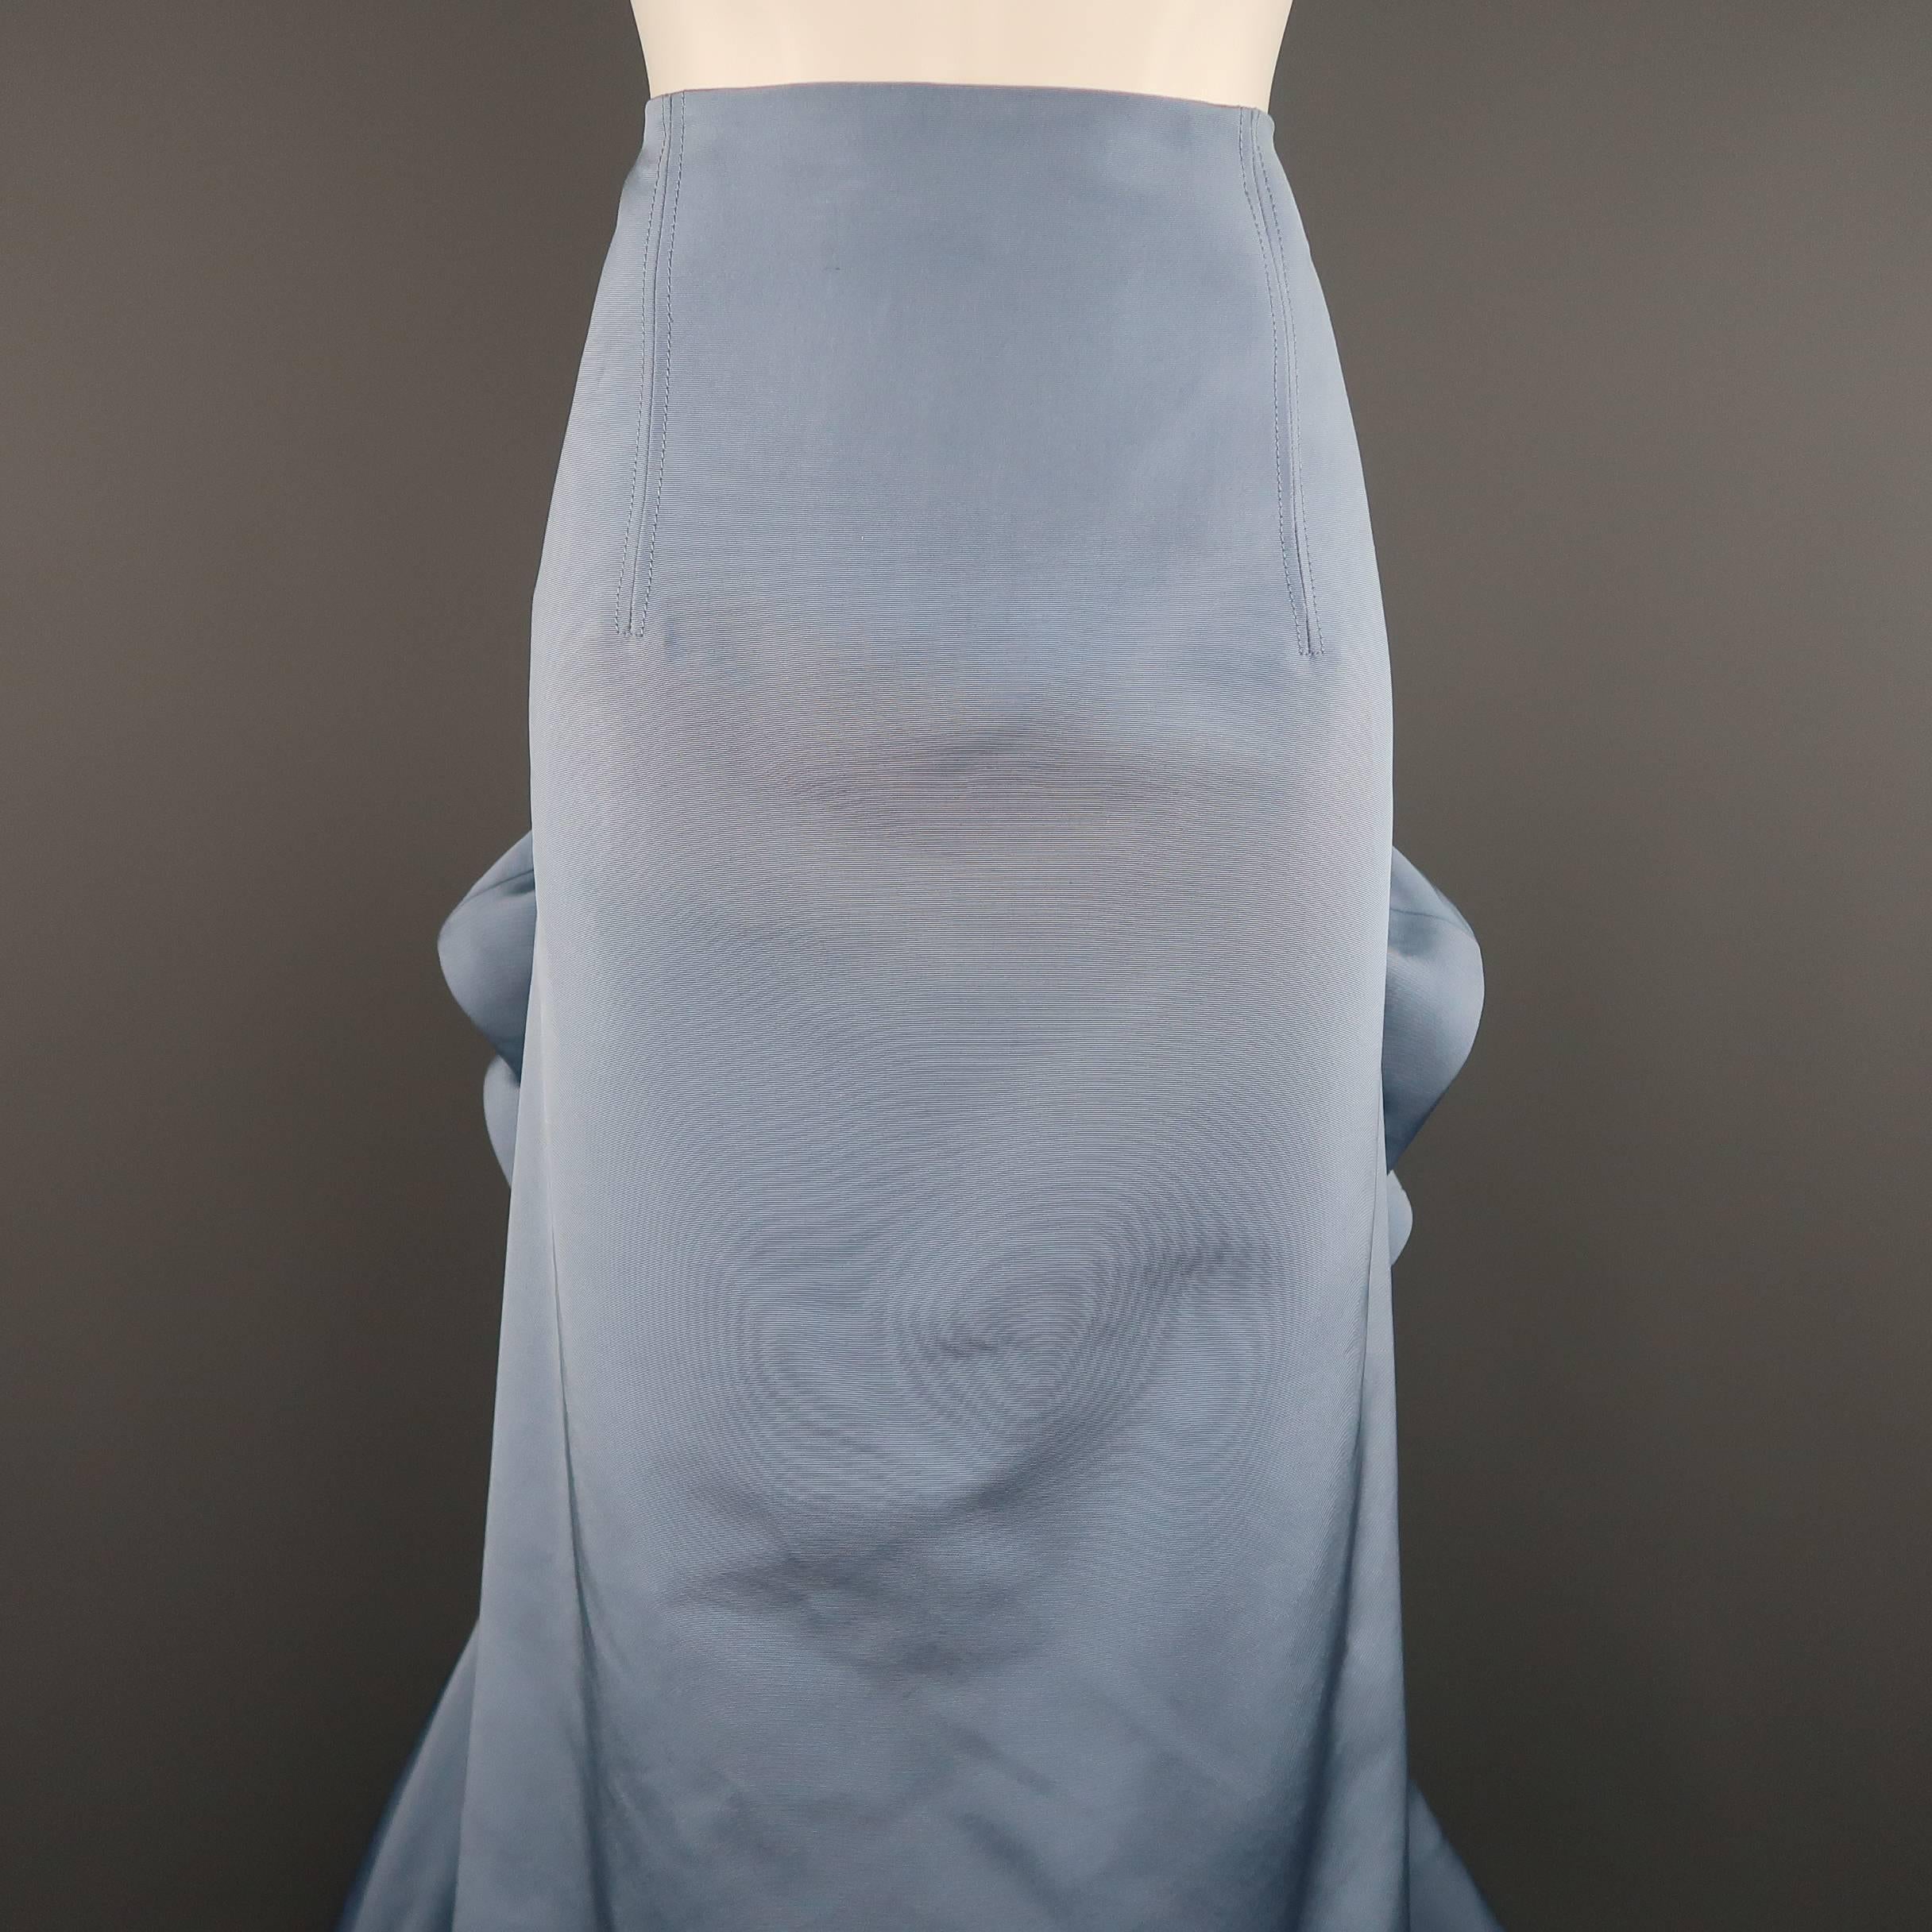 This stunning evening skirt by CAROLINA HERRERA comes in a light blue silk faille and features an A line pencil skirt style front, cascading side ruffles, and gathered ruffle back with peplum. Minor wear and discolorations shown in detail shots.